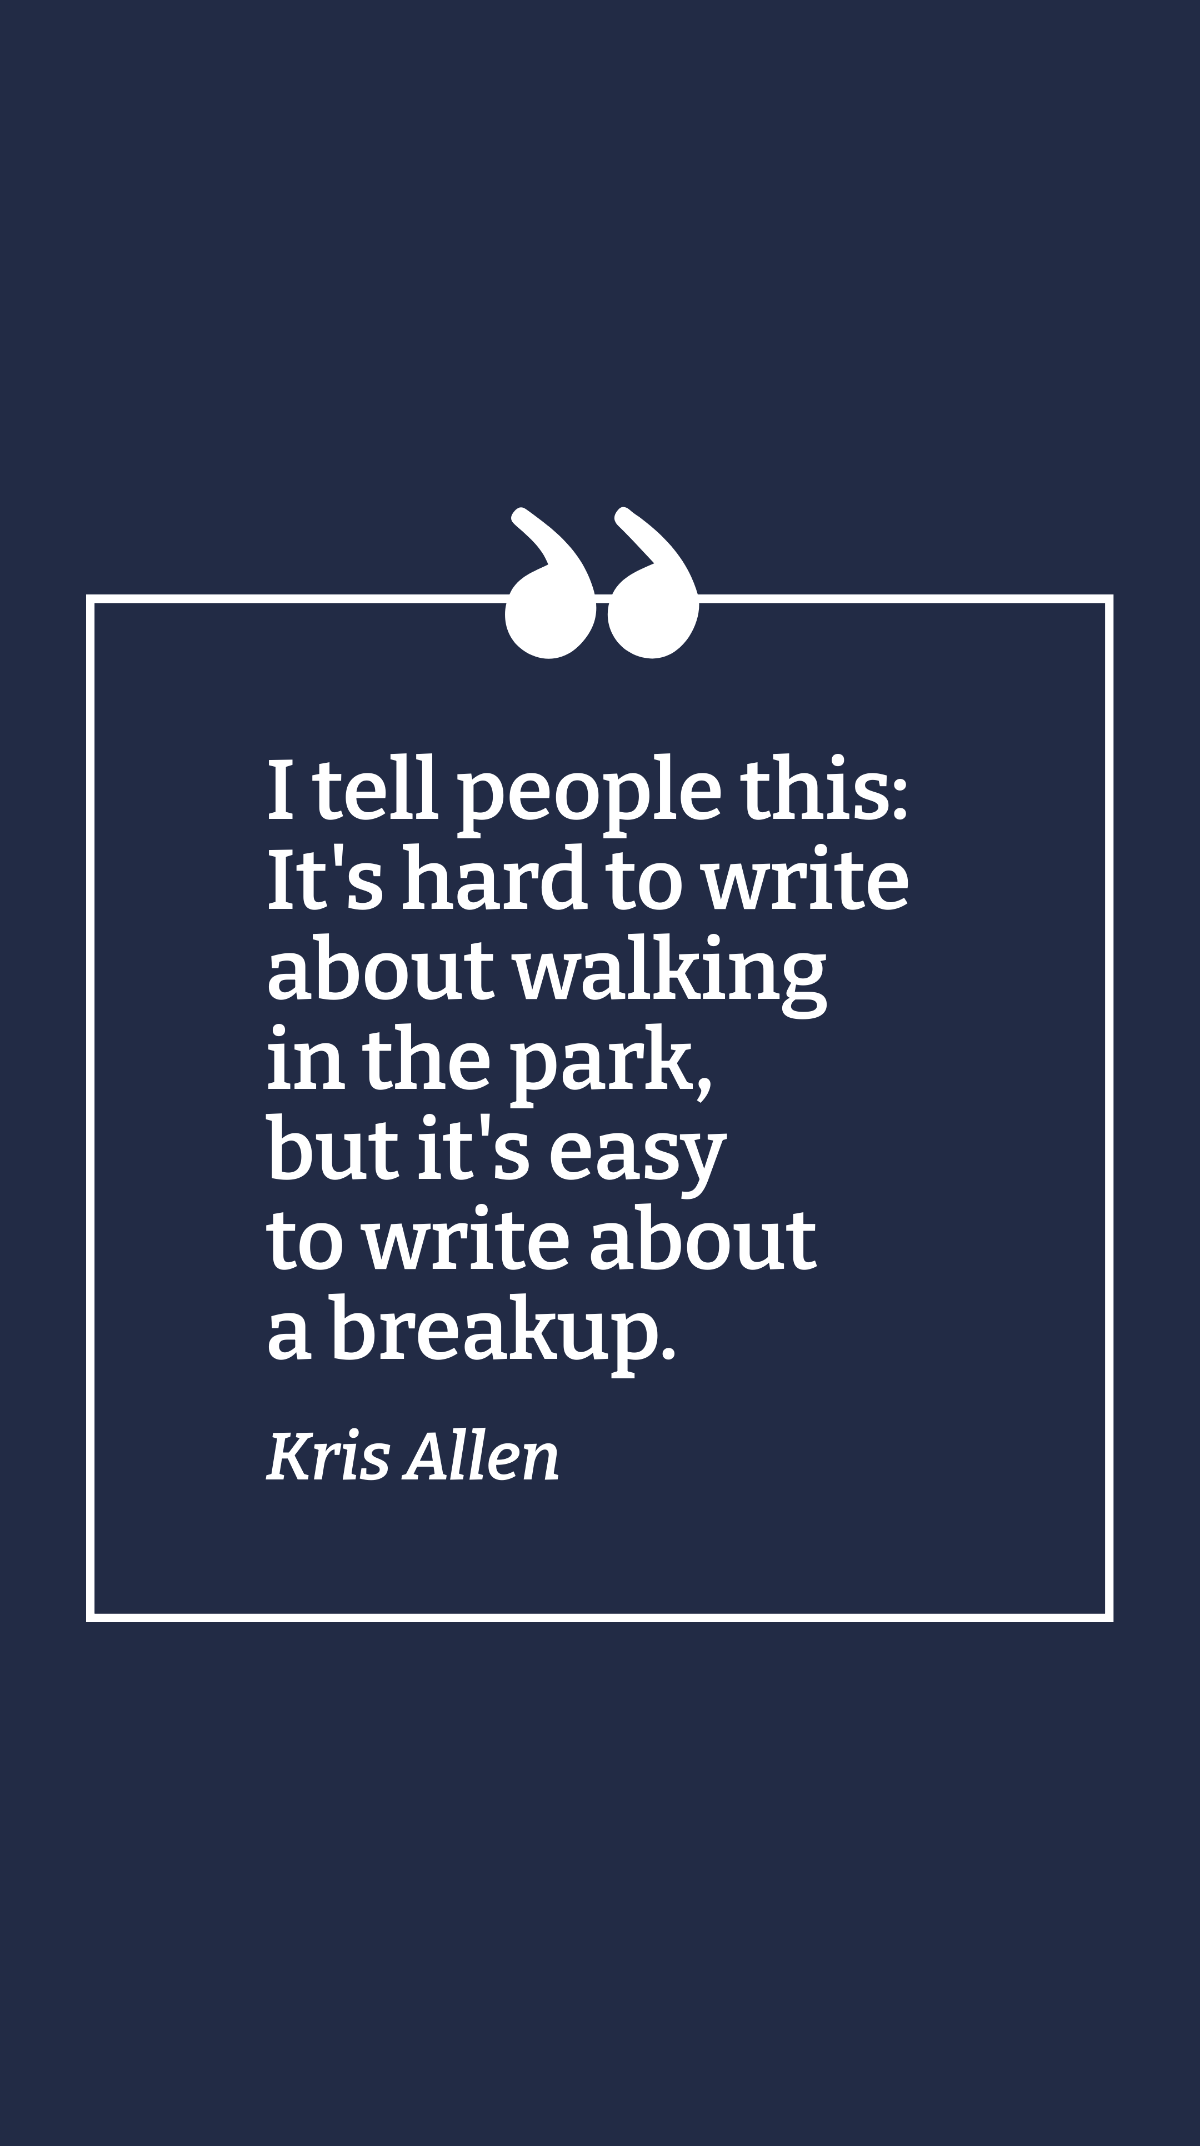 Kris Allen - I tell people this: It's hard to write about walking in the park, but it's easy to write about a breakup. Template